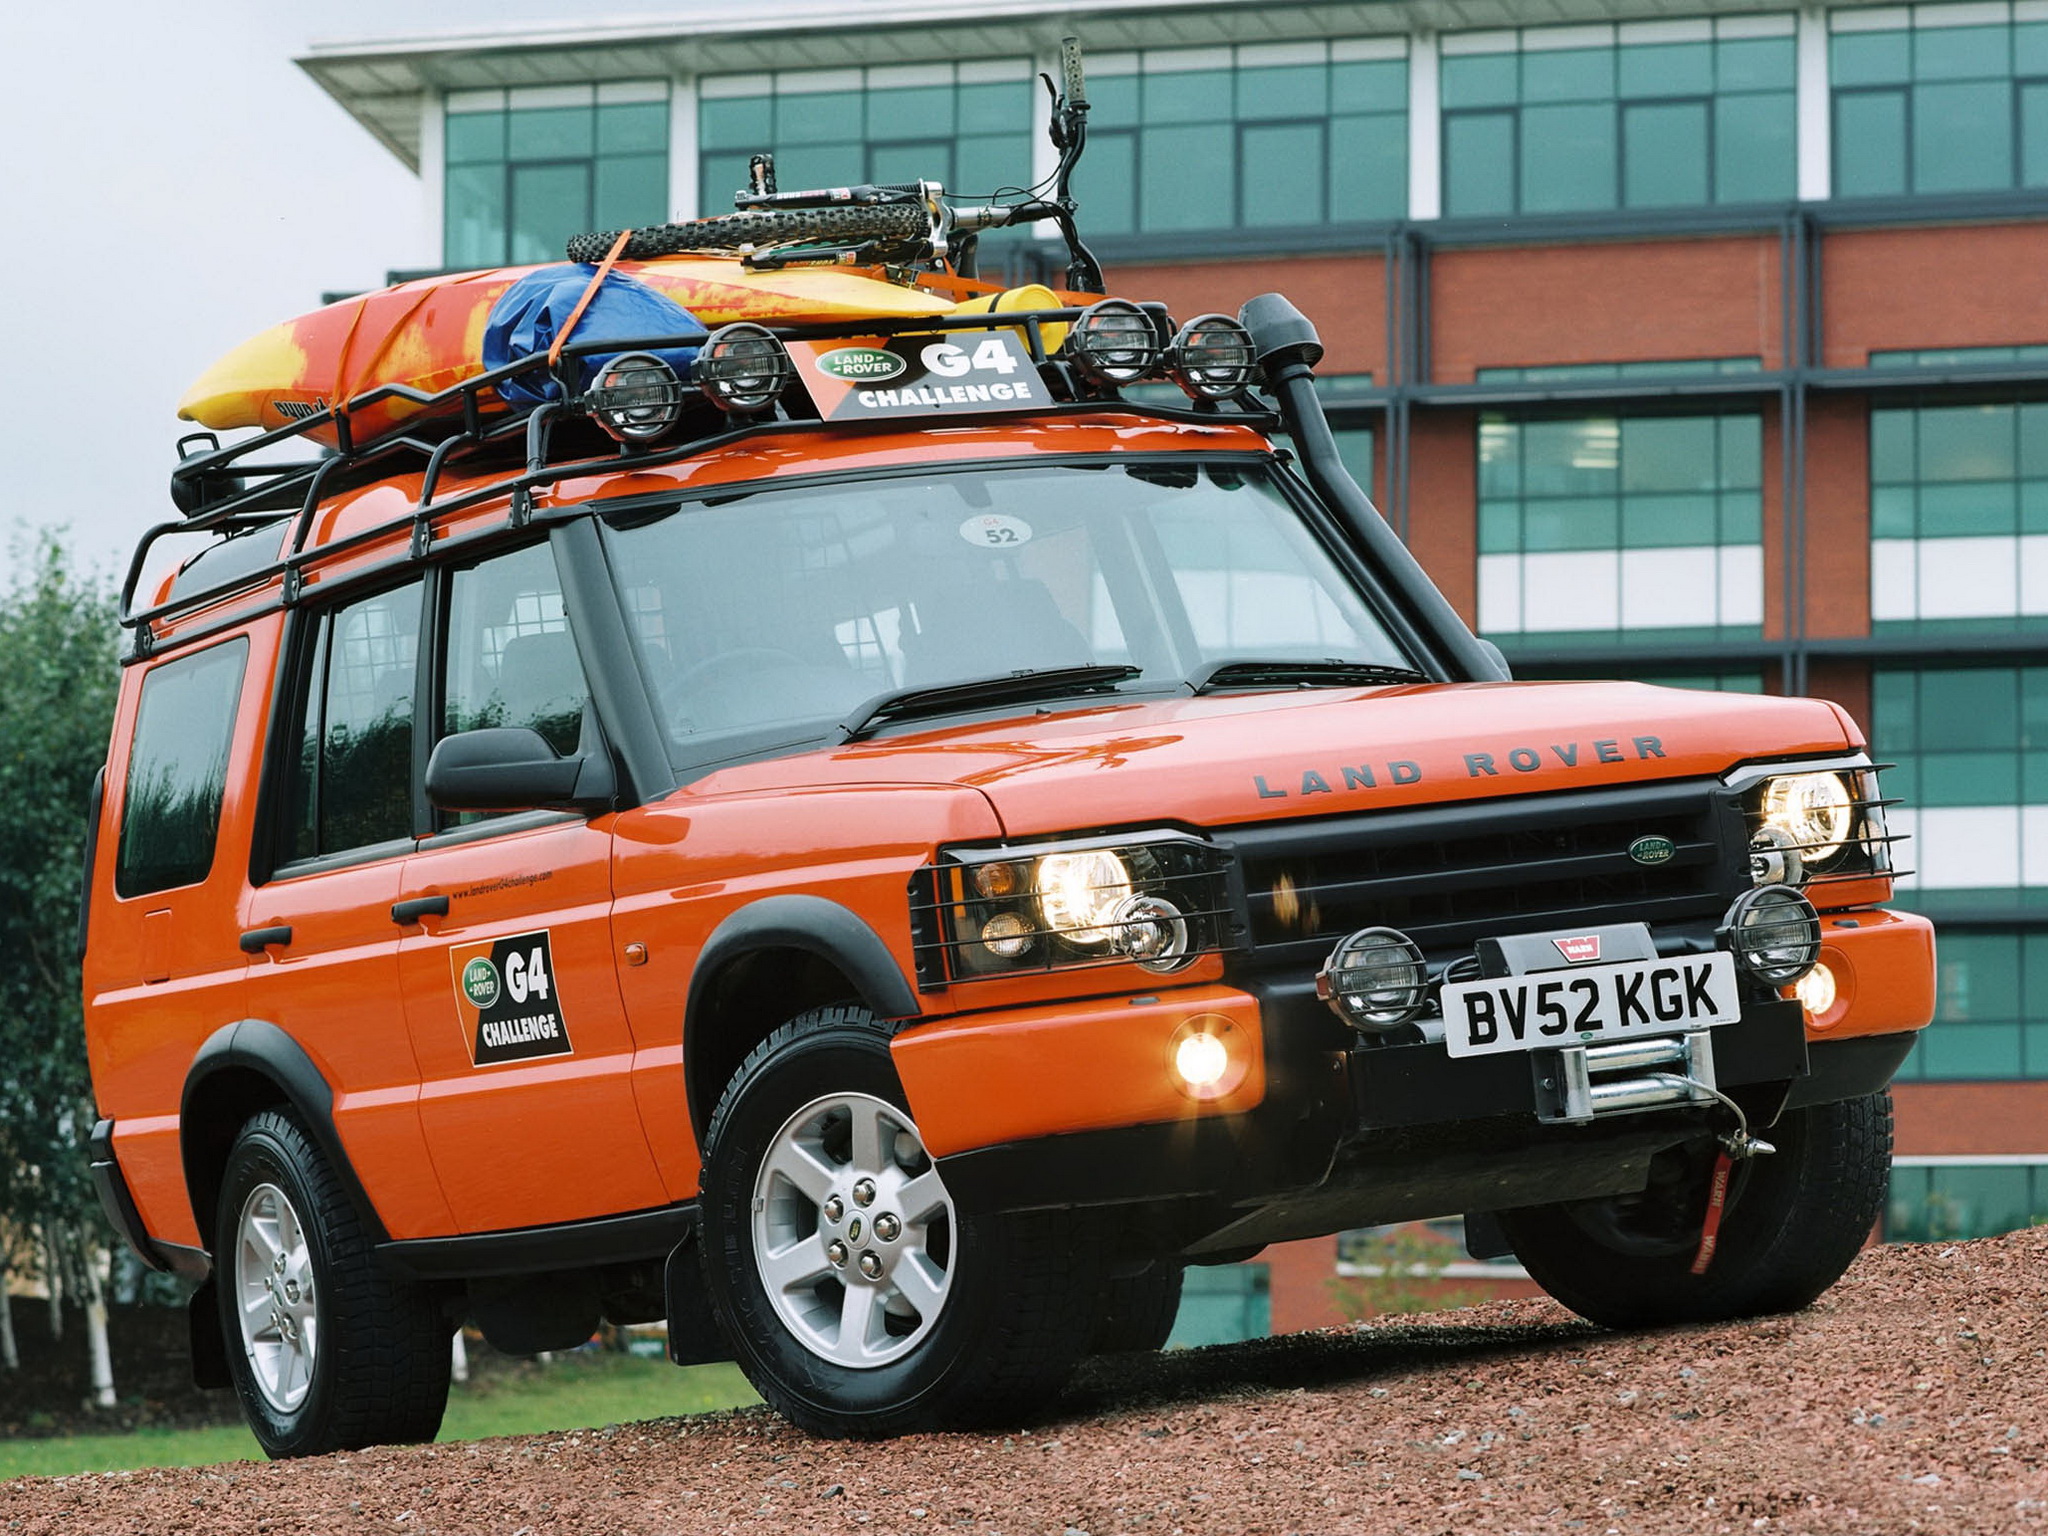 LAND ROVER DISCOVERY 2 G4